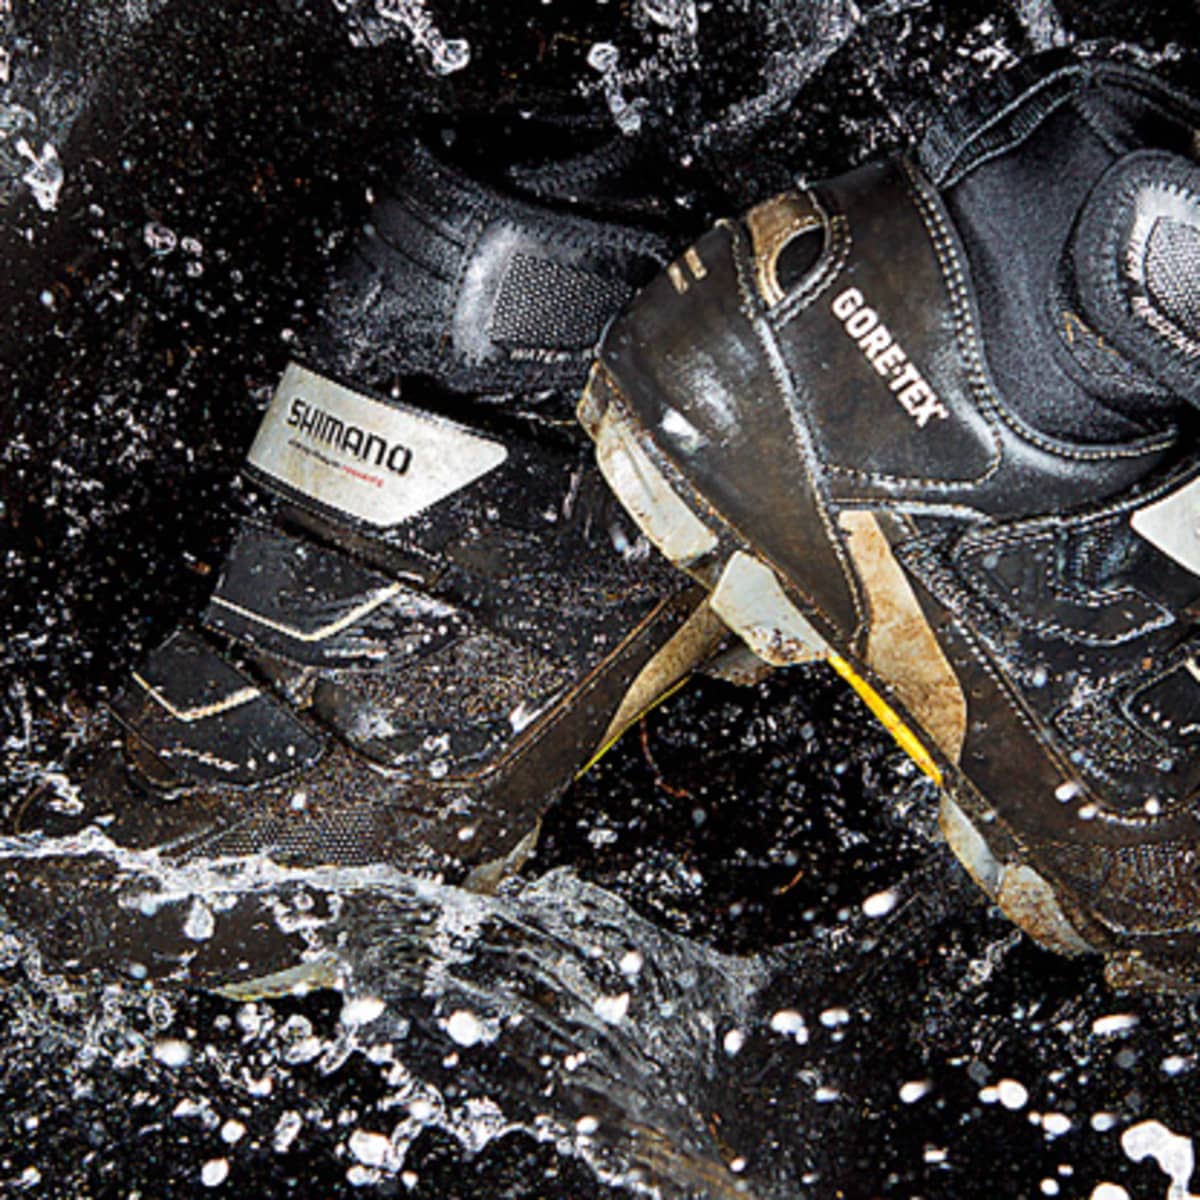 Tested: Shimano MW81 Winter Cycling Shoes - BikeMag